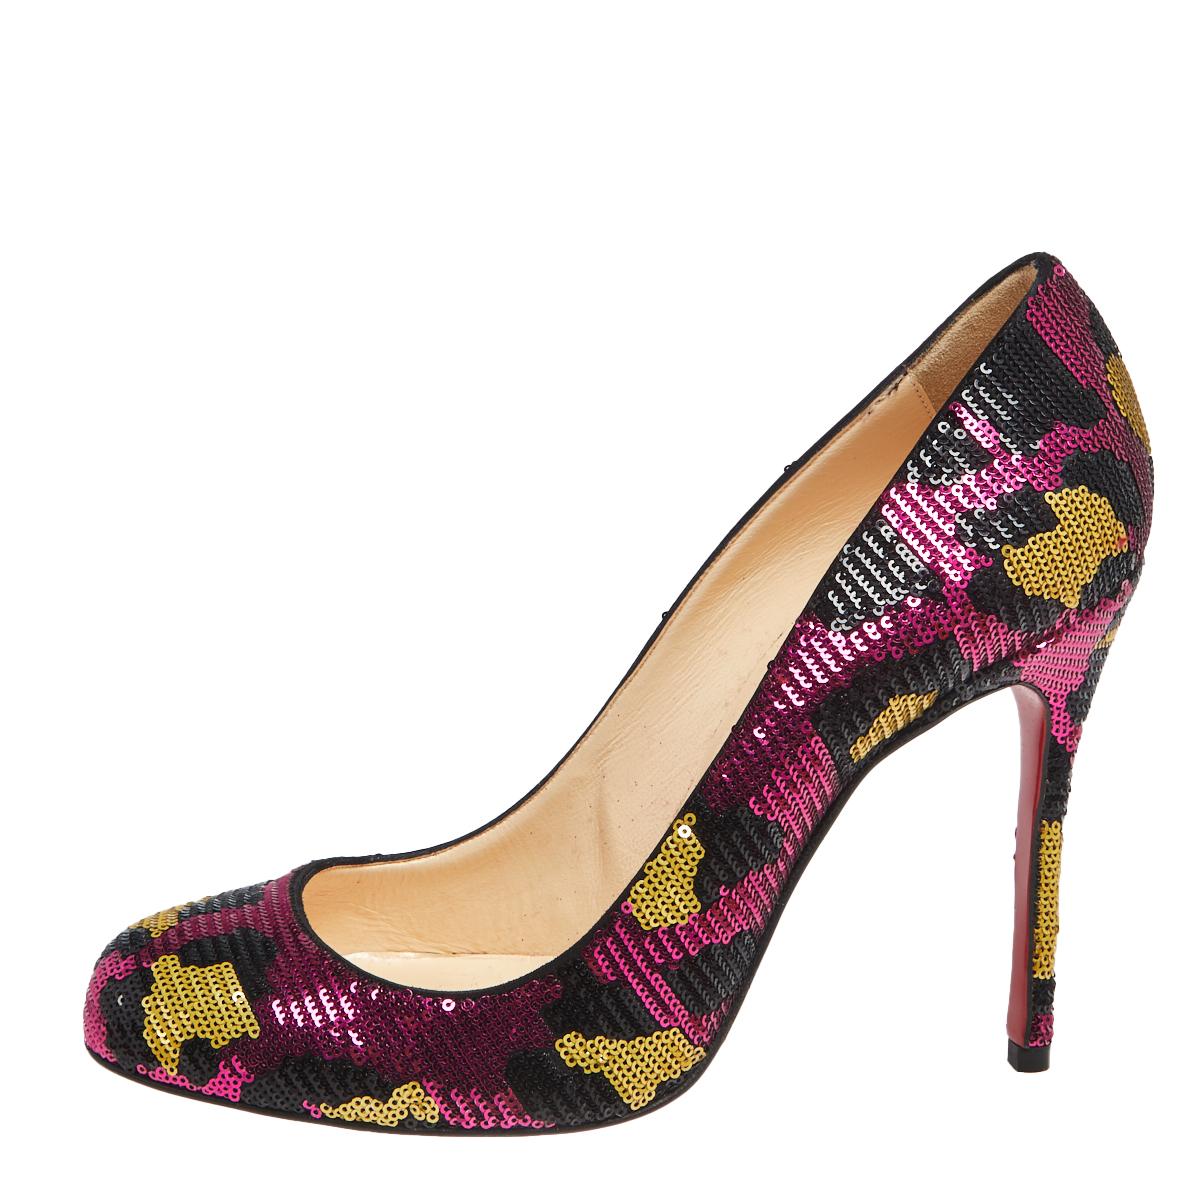 Coming from the House of Christian Louboutin, these gorgeous Fifille pumps truly exemplify elegance and excellence. They are made from multicolored sequins on the exterior and showcase rounded toes, a slip-on style, and slender heels. For a